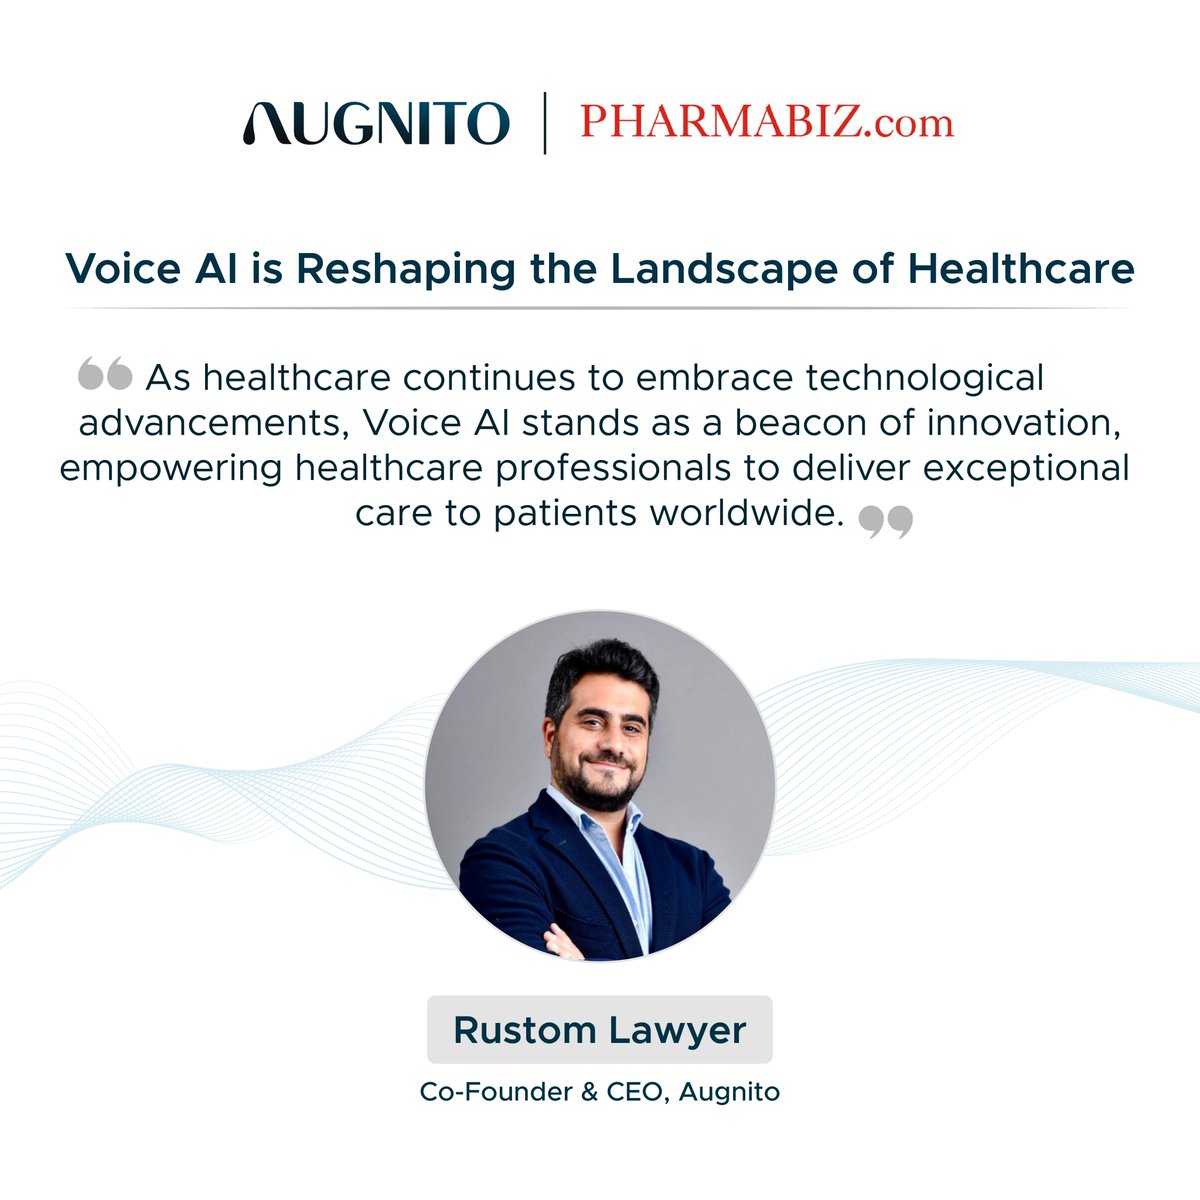 Excited to announce our feature in @pharmabiznews, where our Co-Founder and CEO @RustomL shared insightful perspective on the transformative potential of Voice AI in healthcare. Read more: bit.ly/VoiceAIinHealt… #AugnitointheMedia #VoiceAI #SpeechRecognition #Healthcare